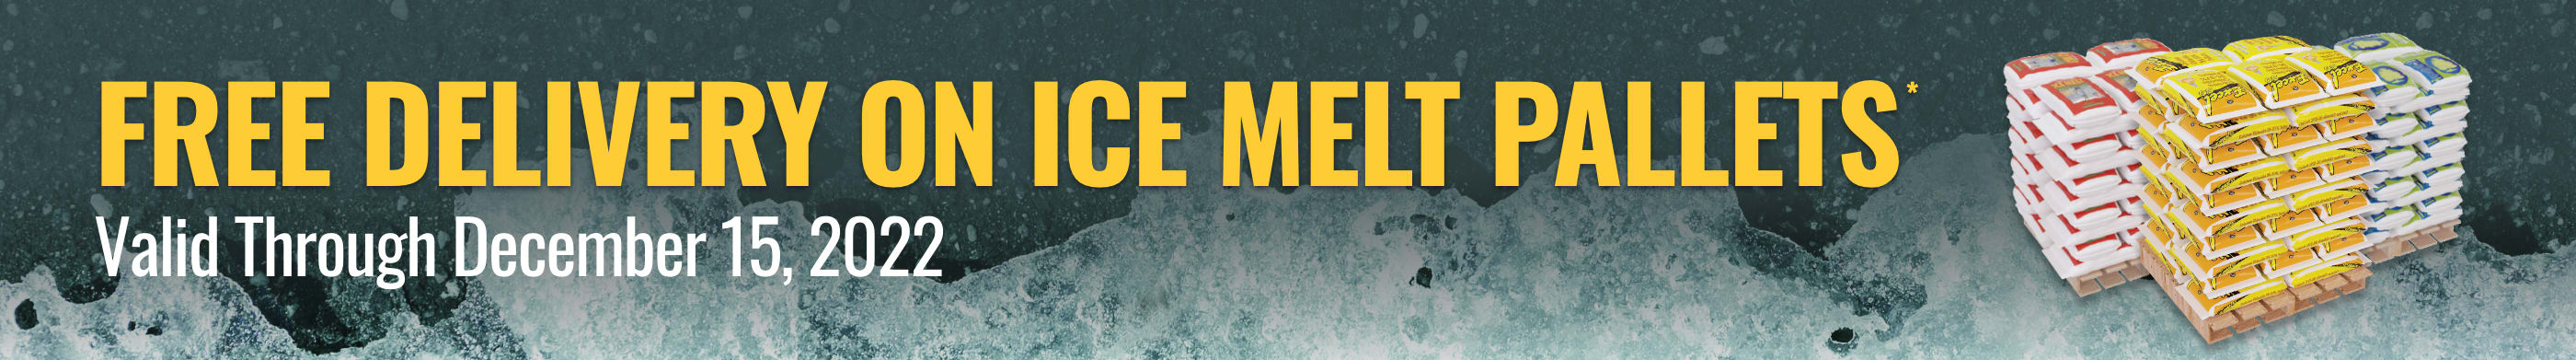 FREE DELIVERY ON ICE MELT PALLETS*